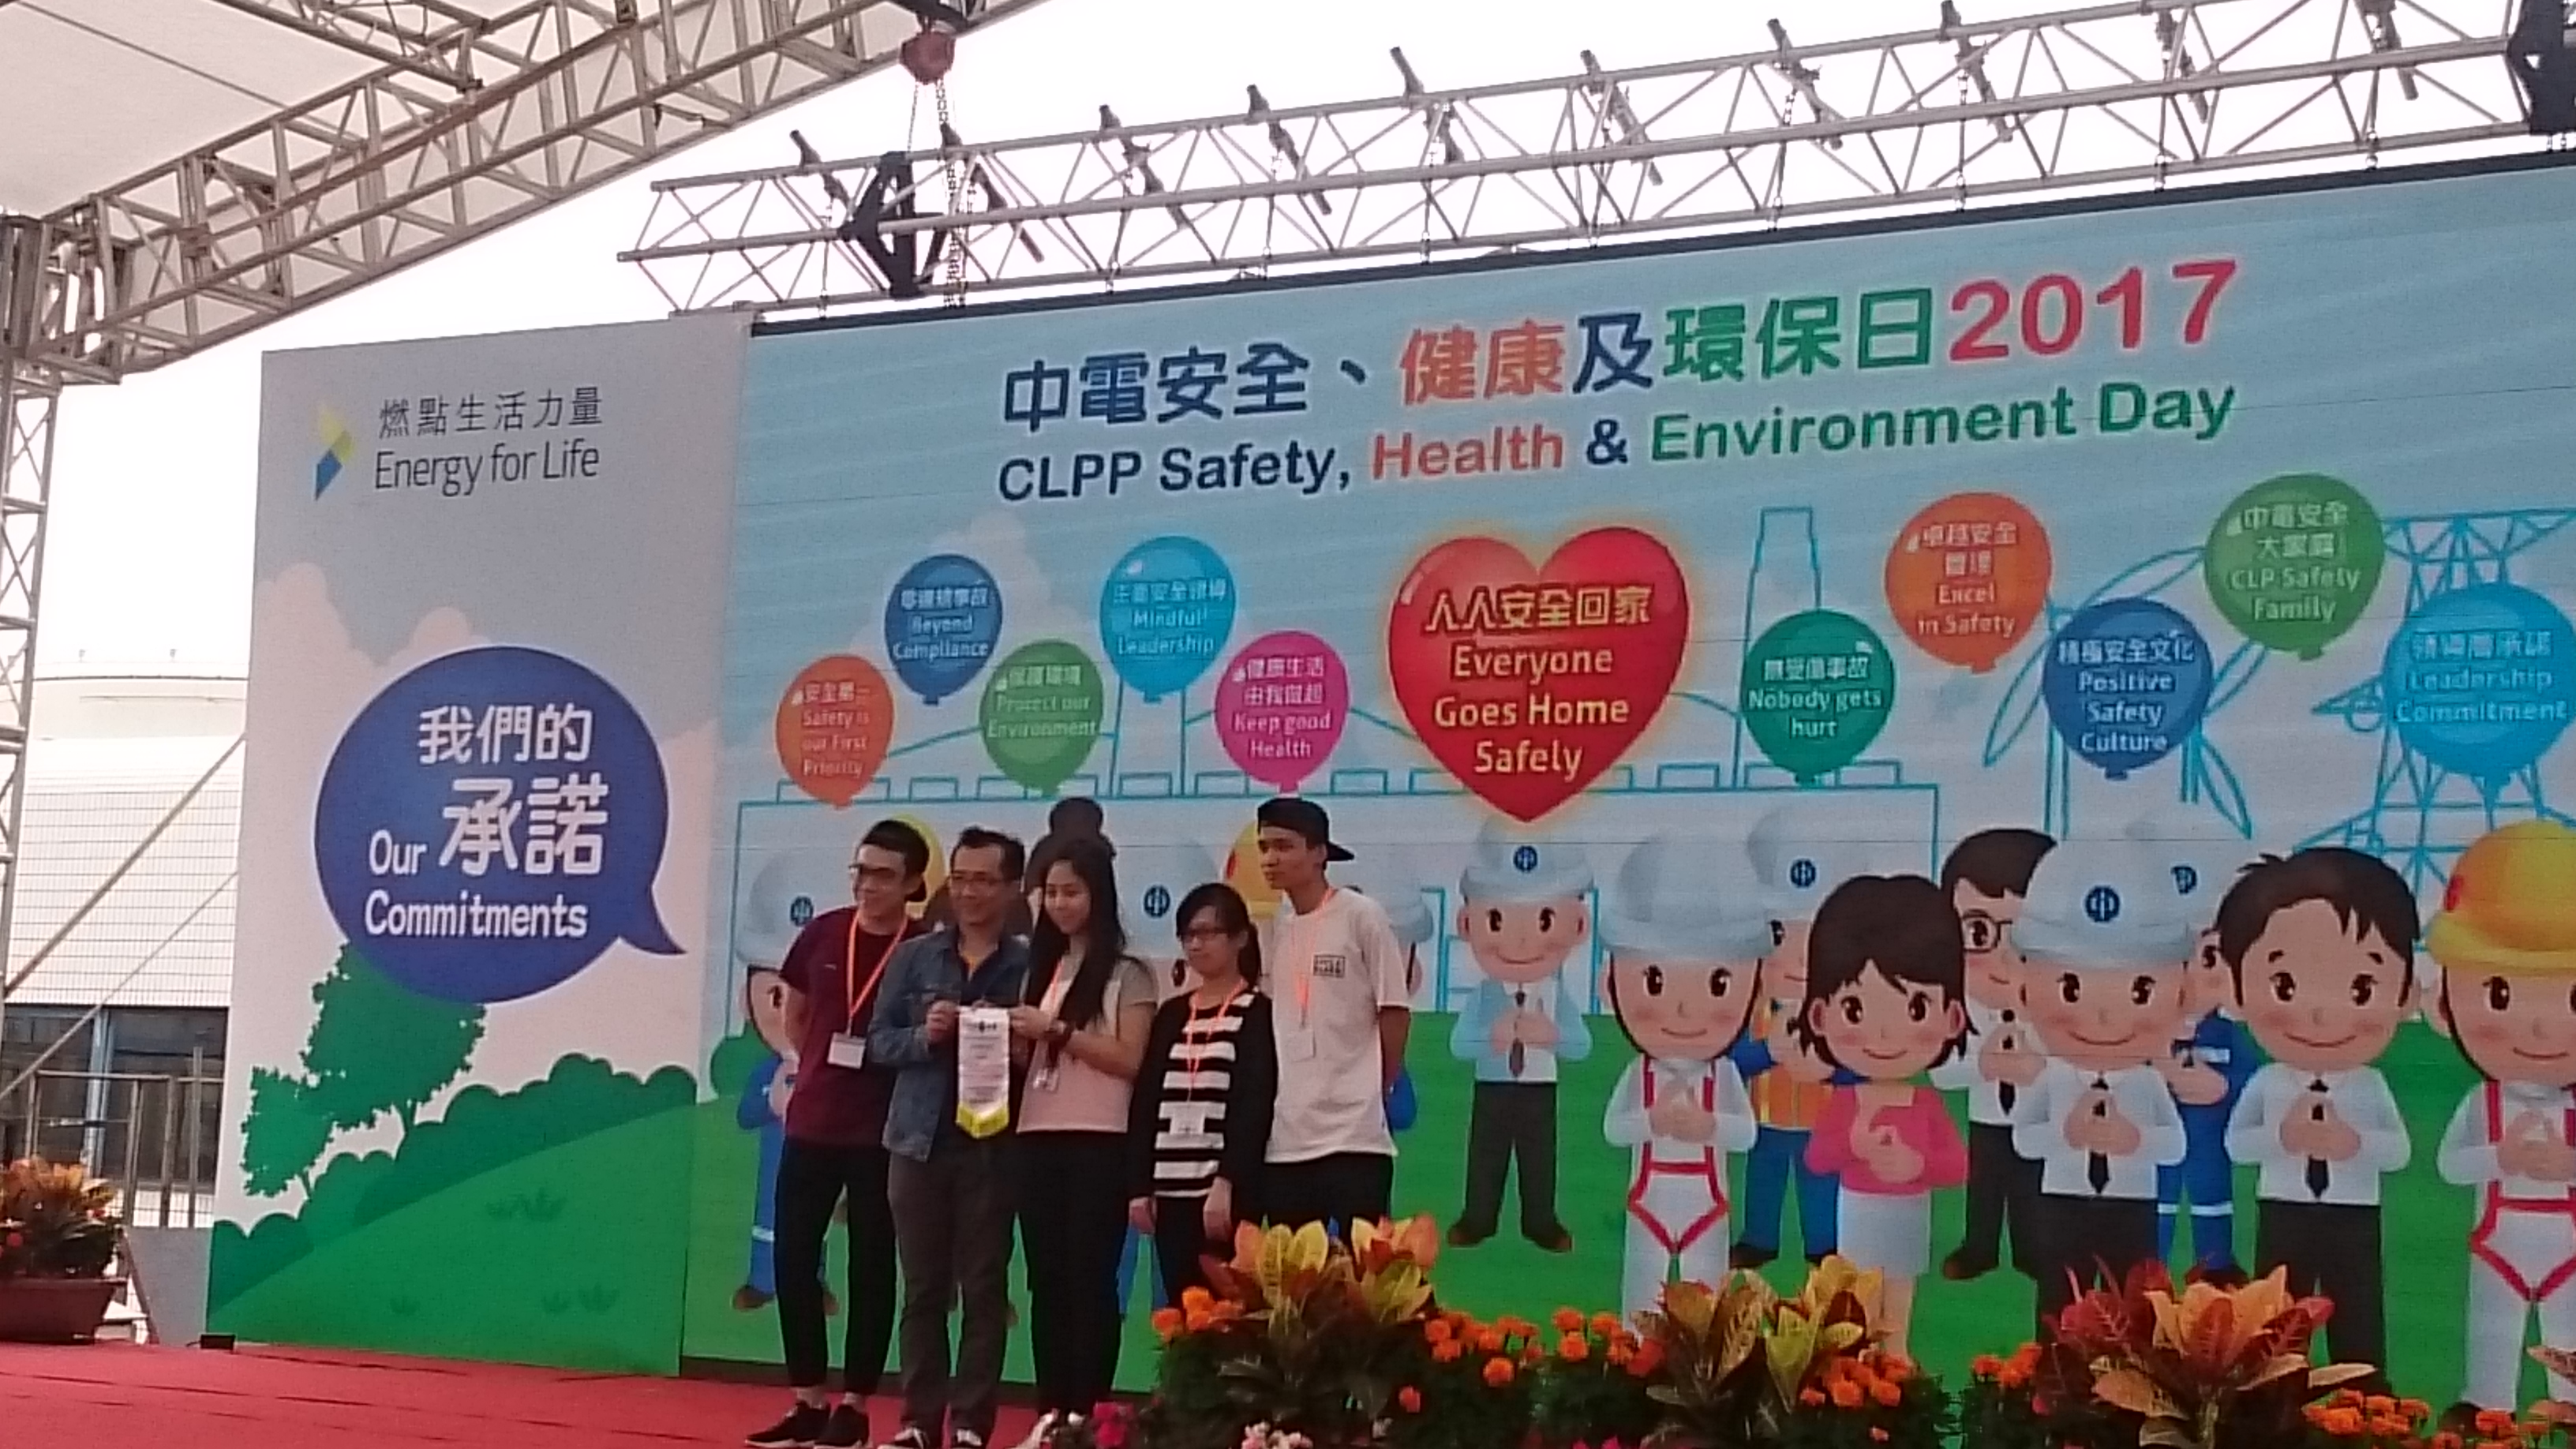 CLP Safety, Health & Environment (SHE) Day in 2017 - Photo - 5